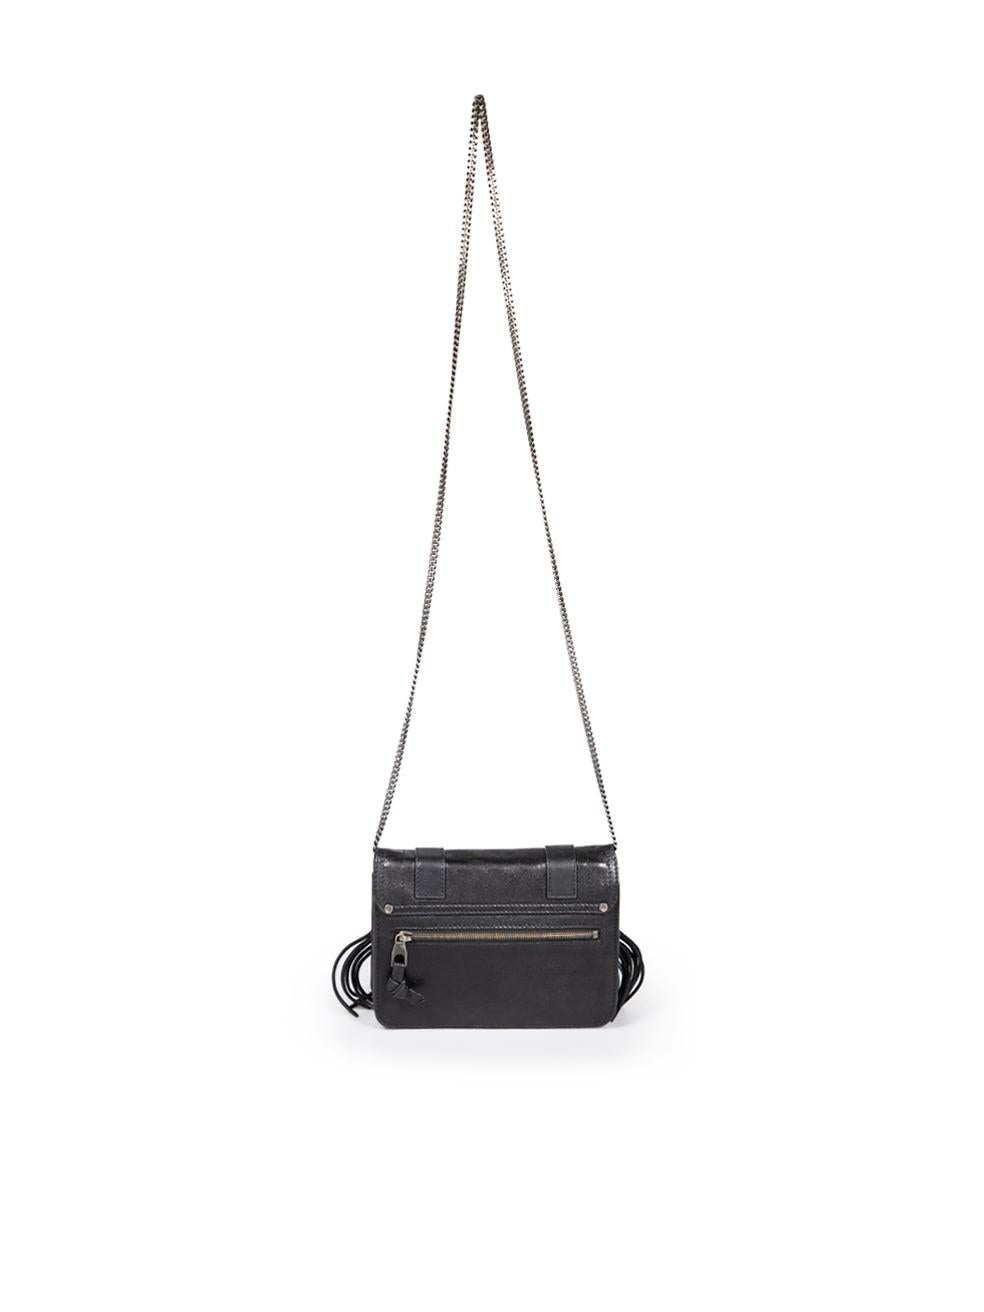 Proenza Schouler Black Leather Fringe Crossbody In Good Condition For Sale In London, GB